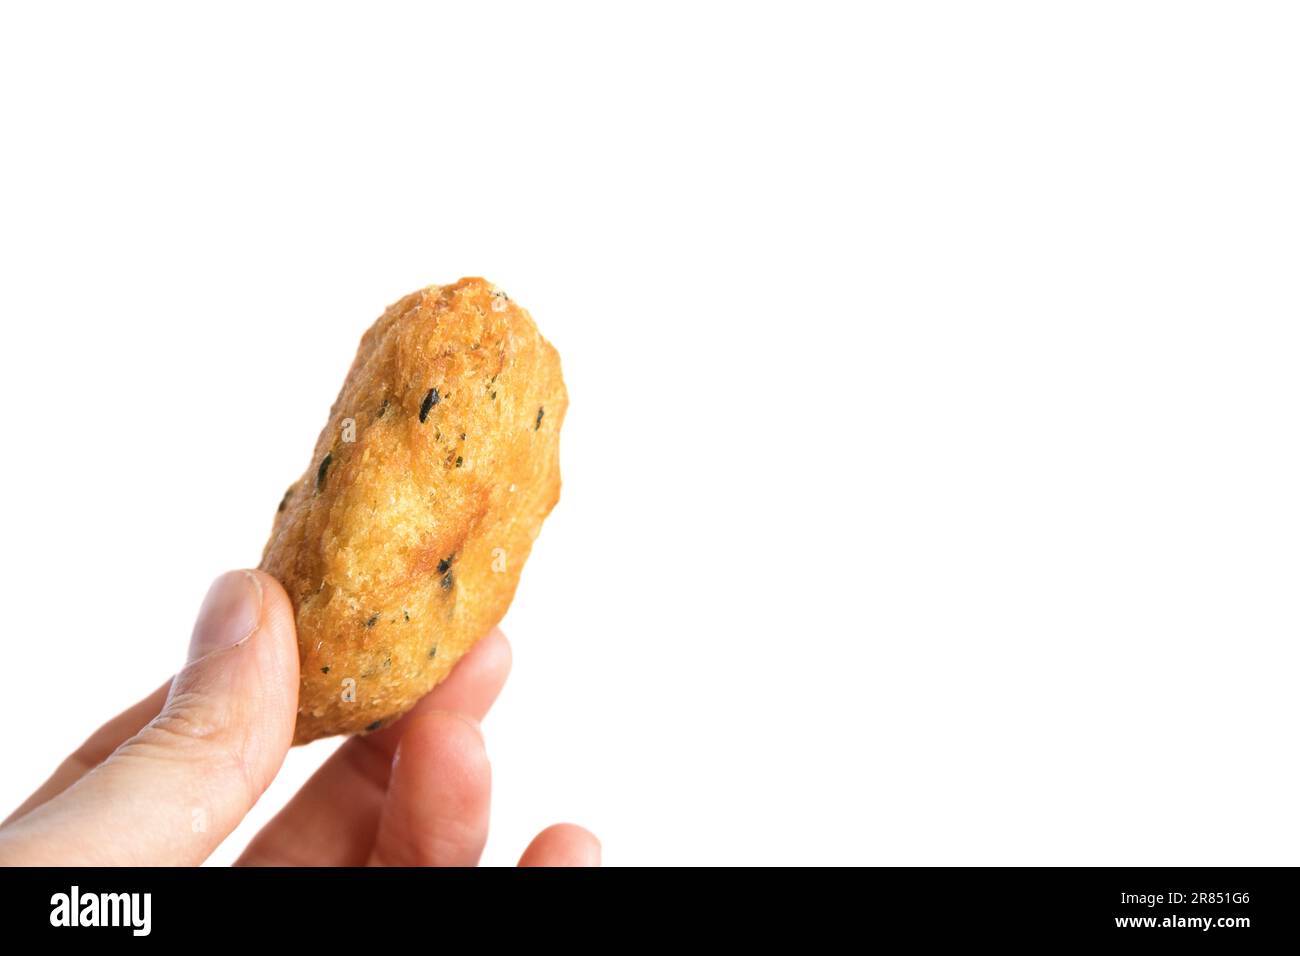 Cod dumpling, or 'bolinho de bacalhau', very famous in Portuguese gastronomy. Fried dumpling, fish, salted cod fritters. Hand holding cod fritter. Stock Photo